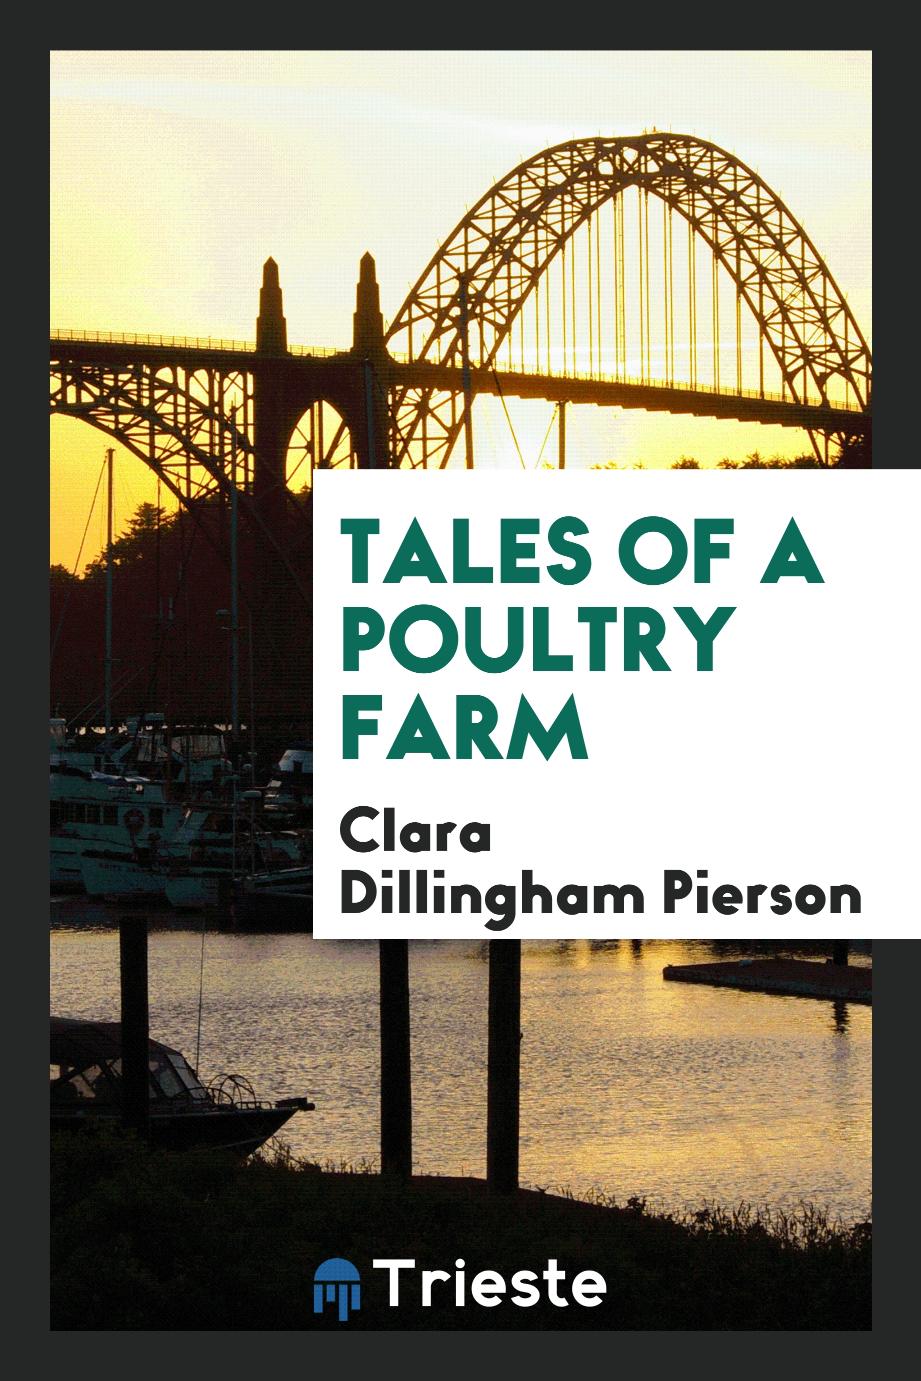 Tales of a poultry farm